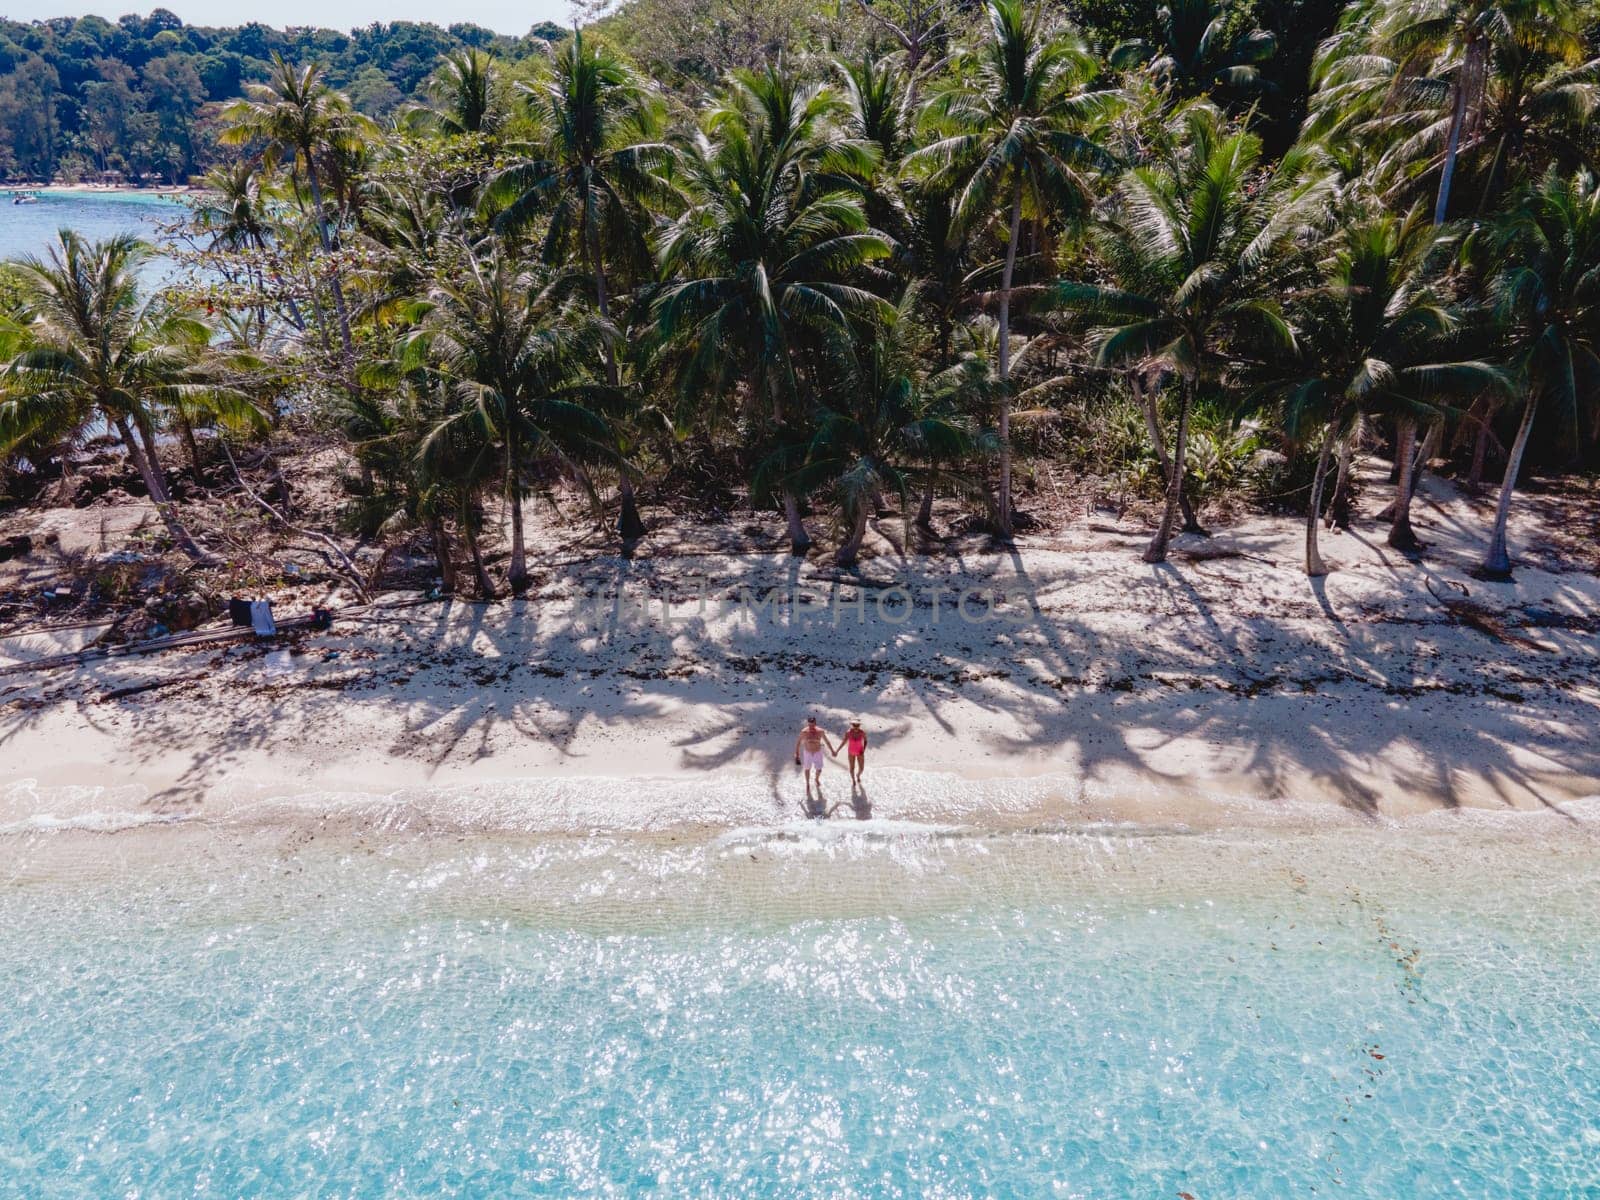 Drone aerial view at Koh Wai Island Trat Thailand is a tinny tropical Island near Koh Chang. a young couple of men and women on a tropical beach during a vacation in Thailand